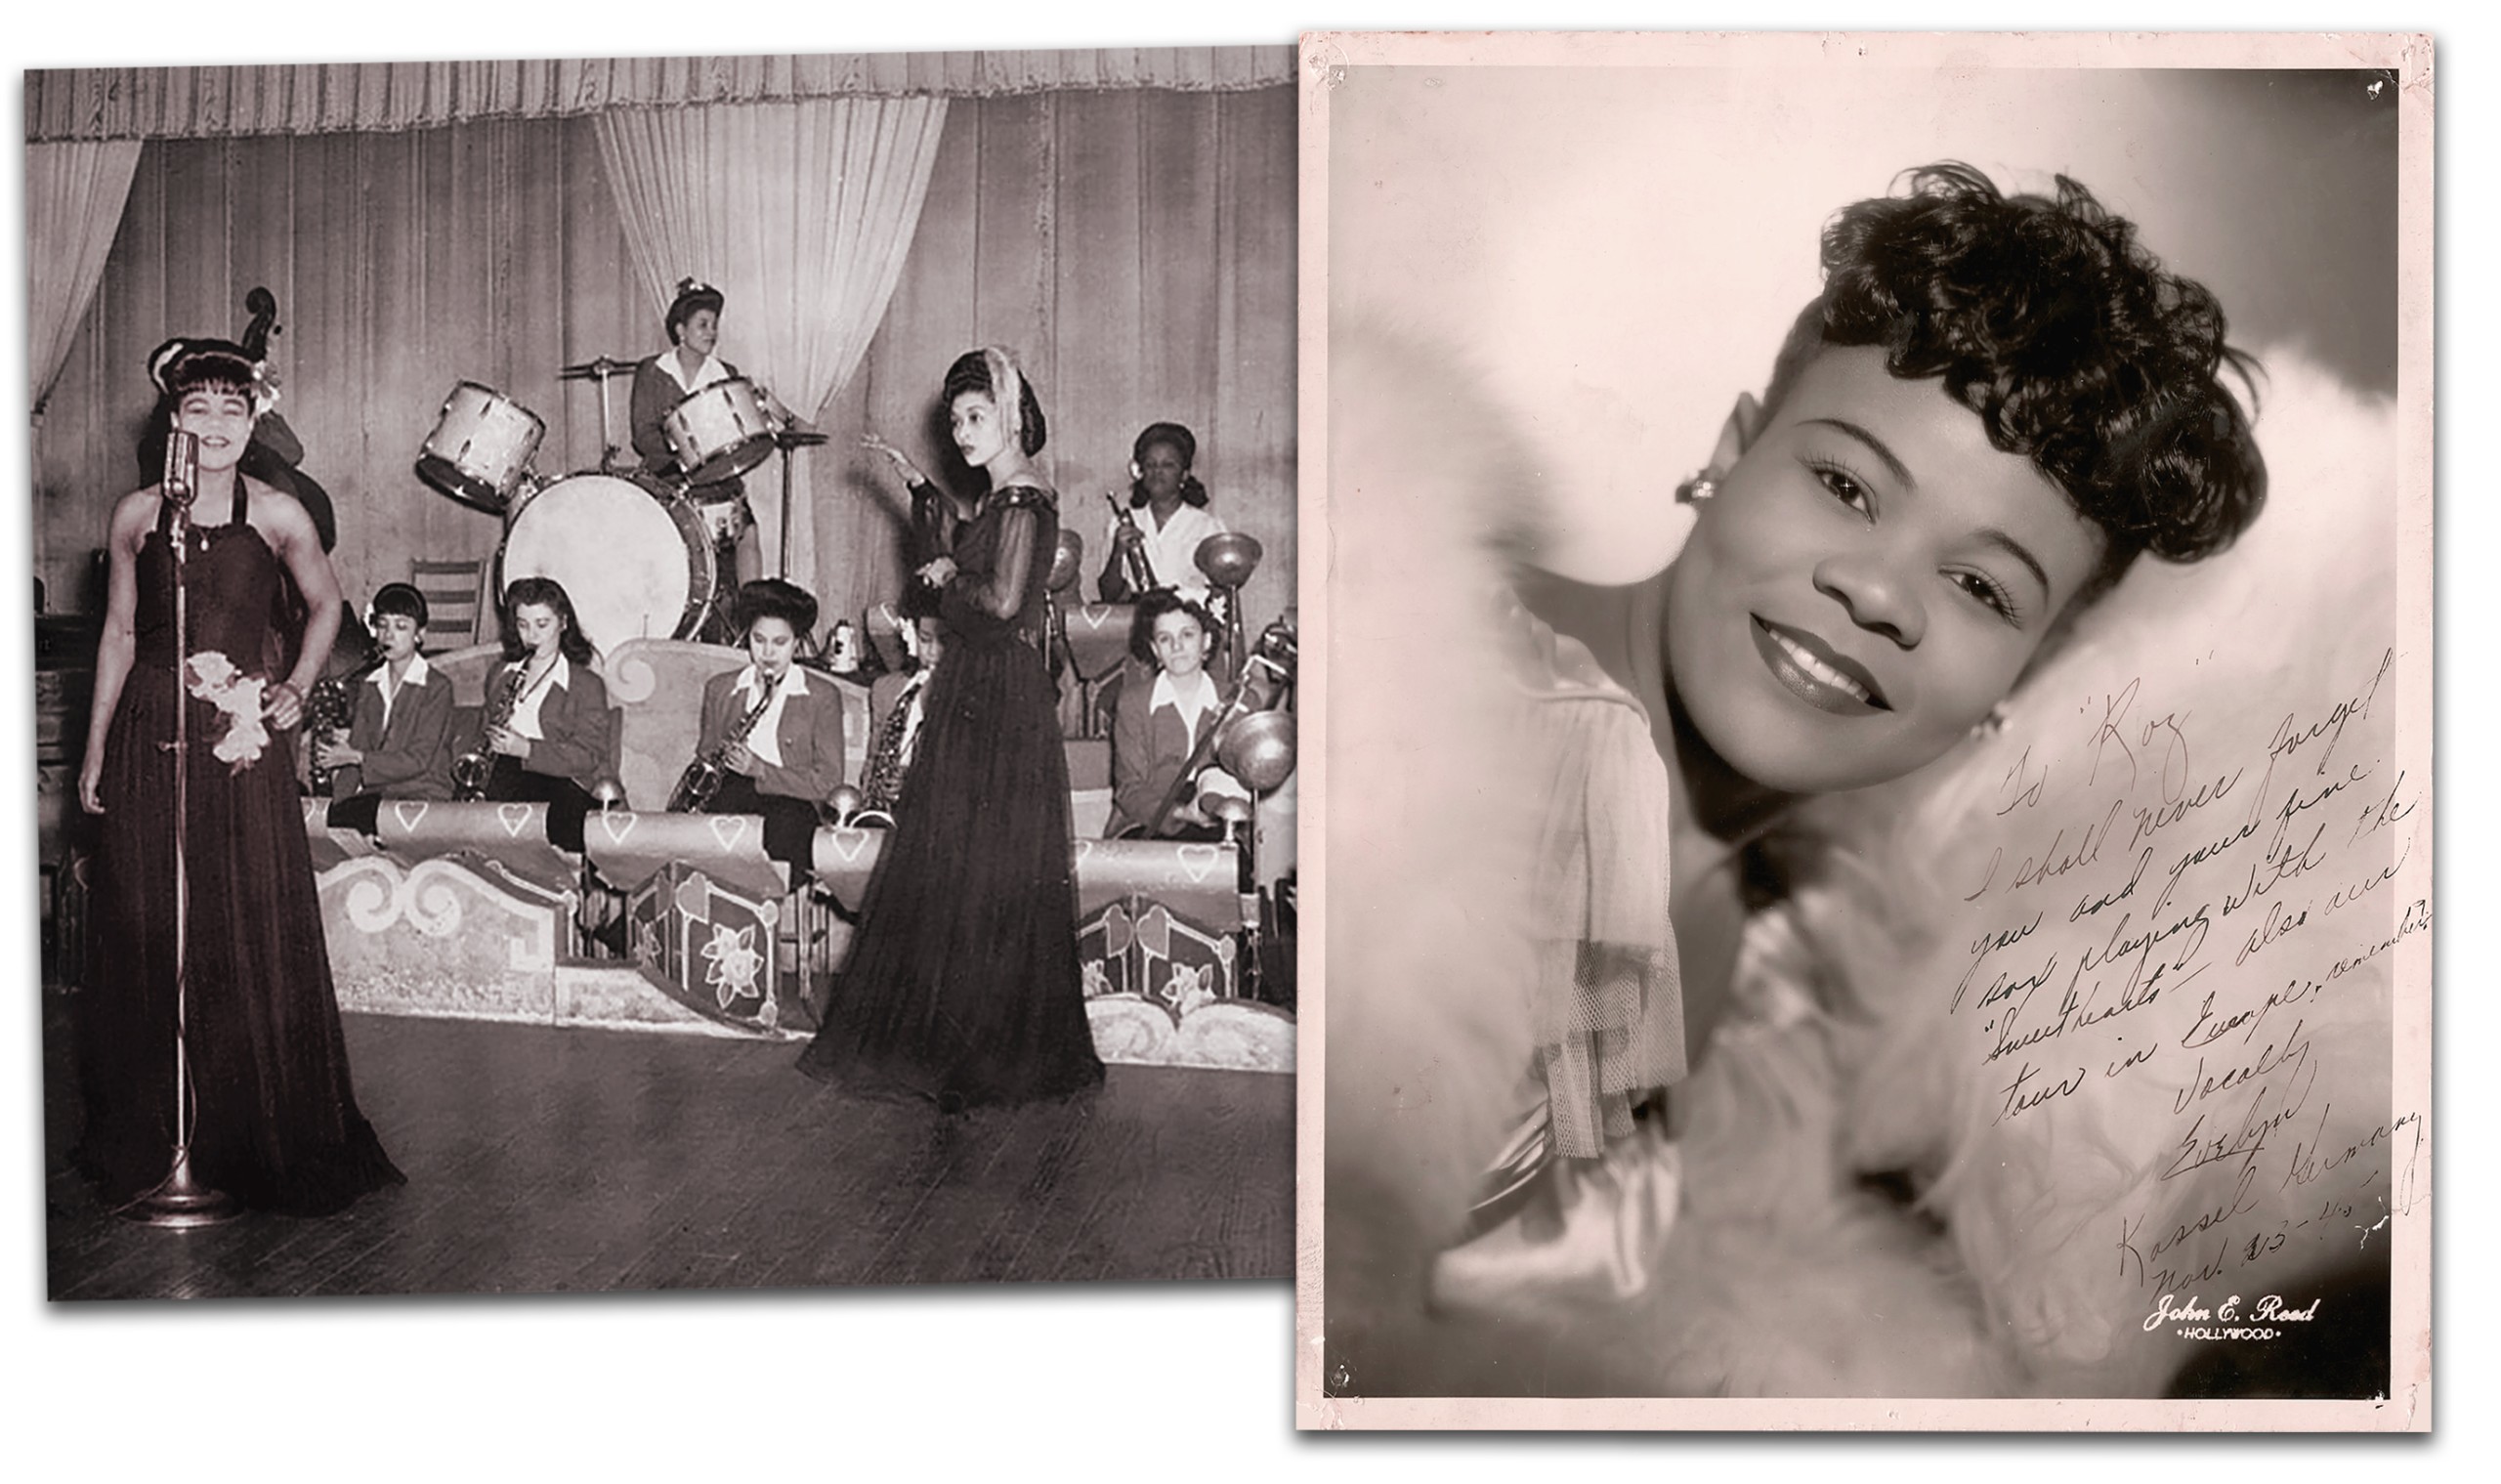 Archives Center NMAHInternational Sweethearts of Rhythm Collection 1218 Series 2: Rosalind Cron Materials Box 1 Folder 15 Evelyn___, member of "Sweethearts", undated. "To 'Roz' I shall never forget you and your fine sax playing with the "Sweethearts" -- also our tour in Europe, remember? Vocally, Evelyn Kassel Germany Nov. 23 - 45". John E. Reed, Hollywood, photographer. Black and white photo, 10" x 8".